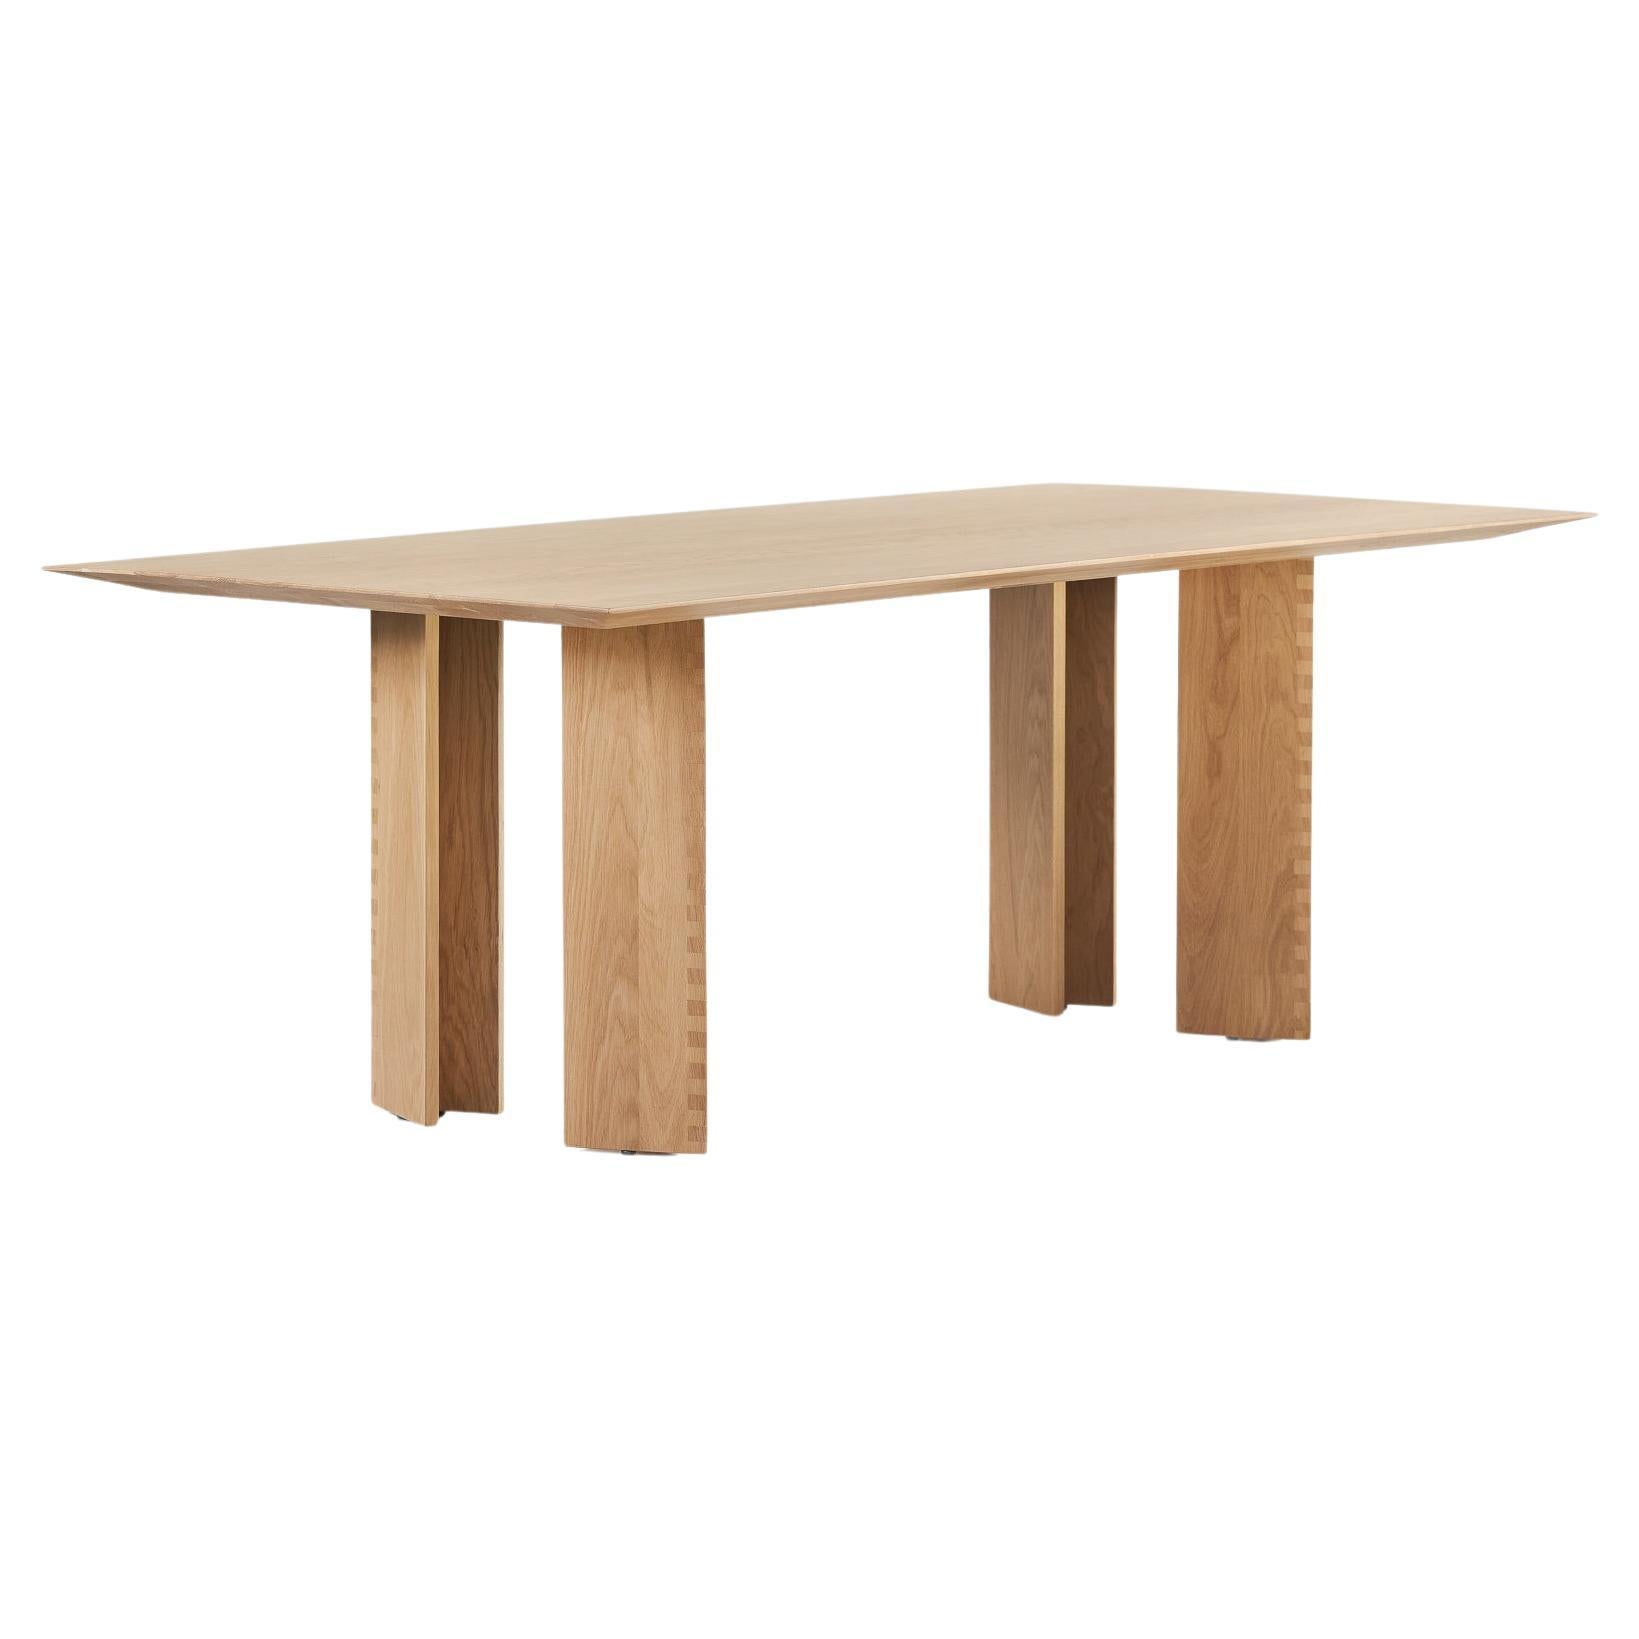 Angus Table by Arbore x Studio PHAT For Sale